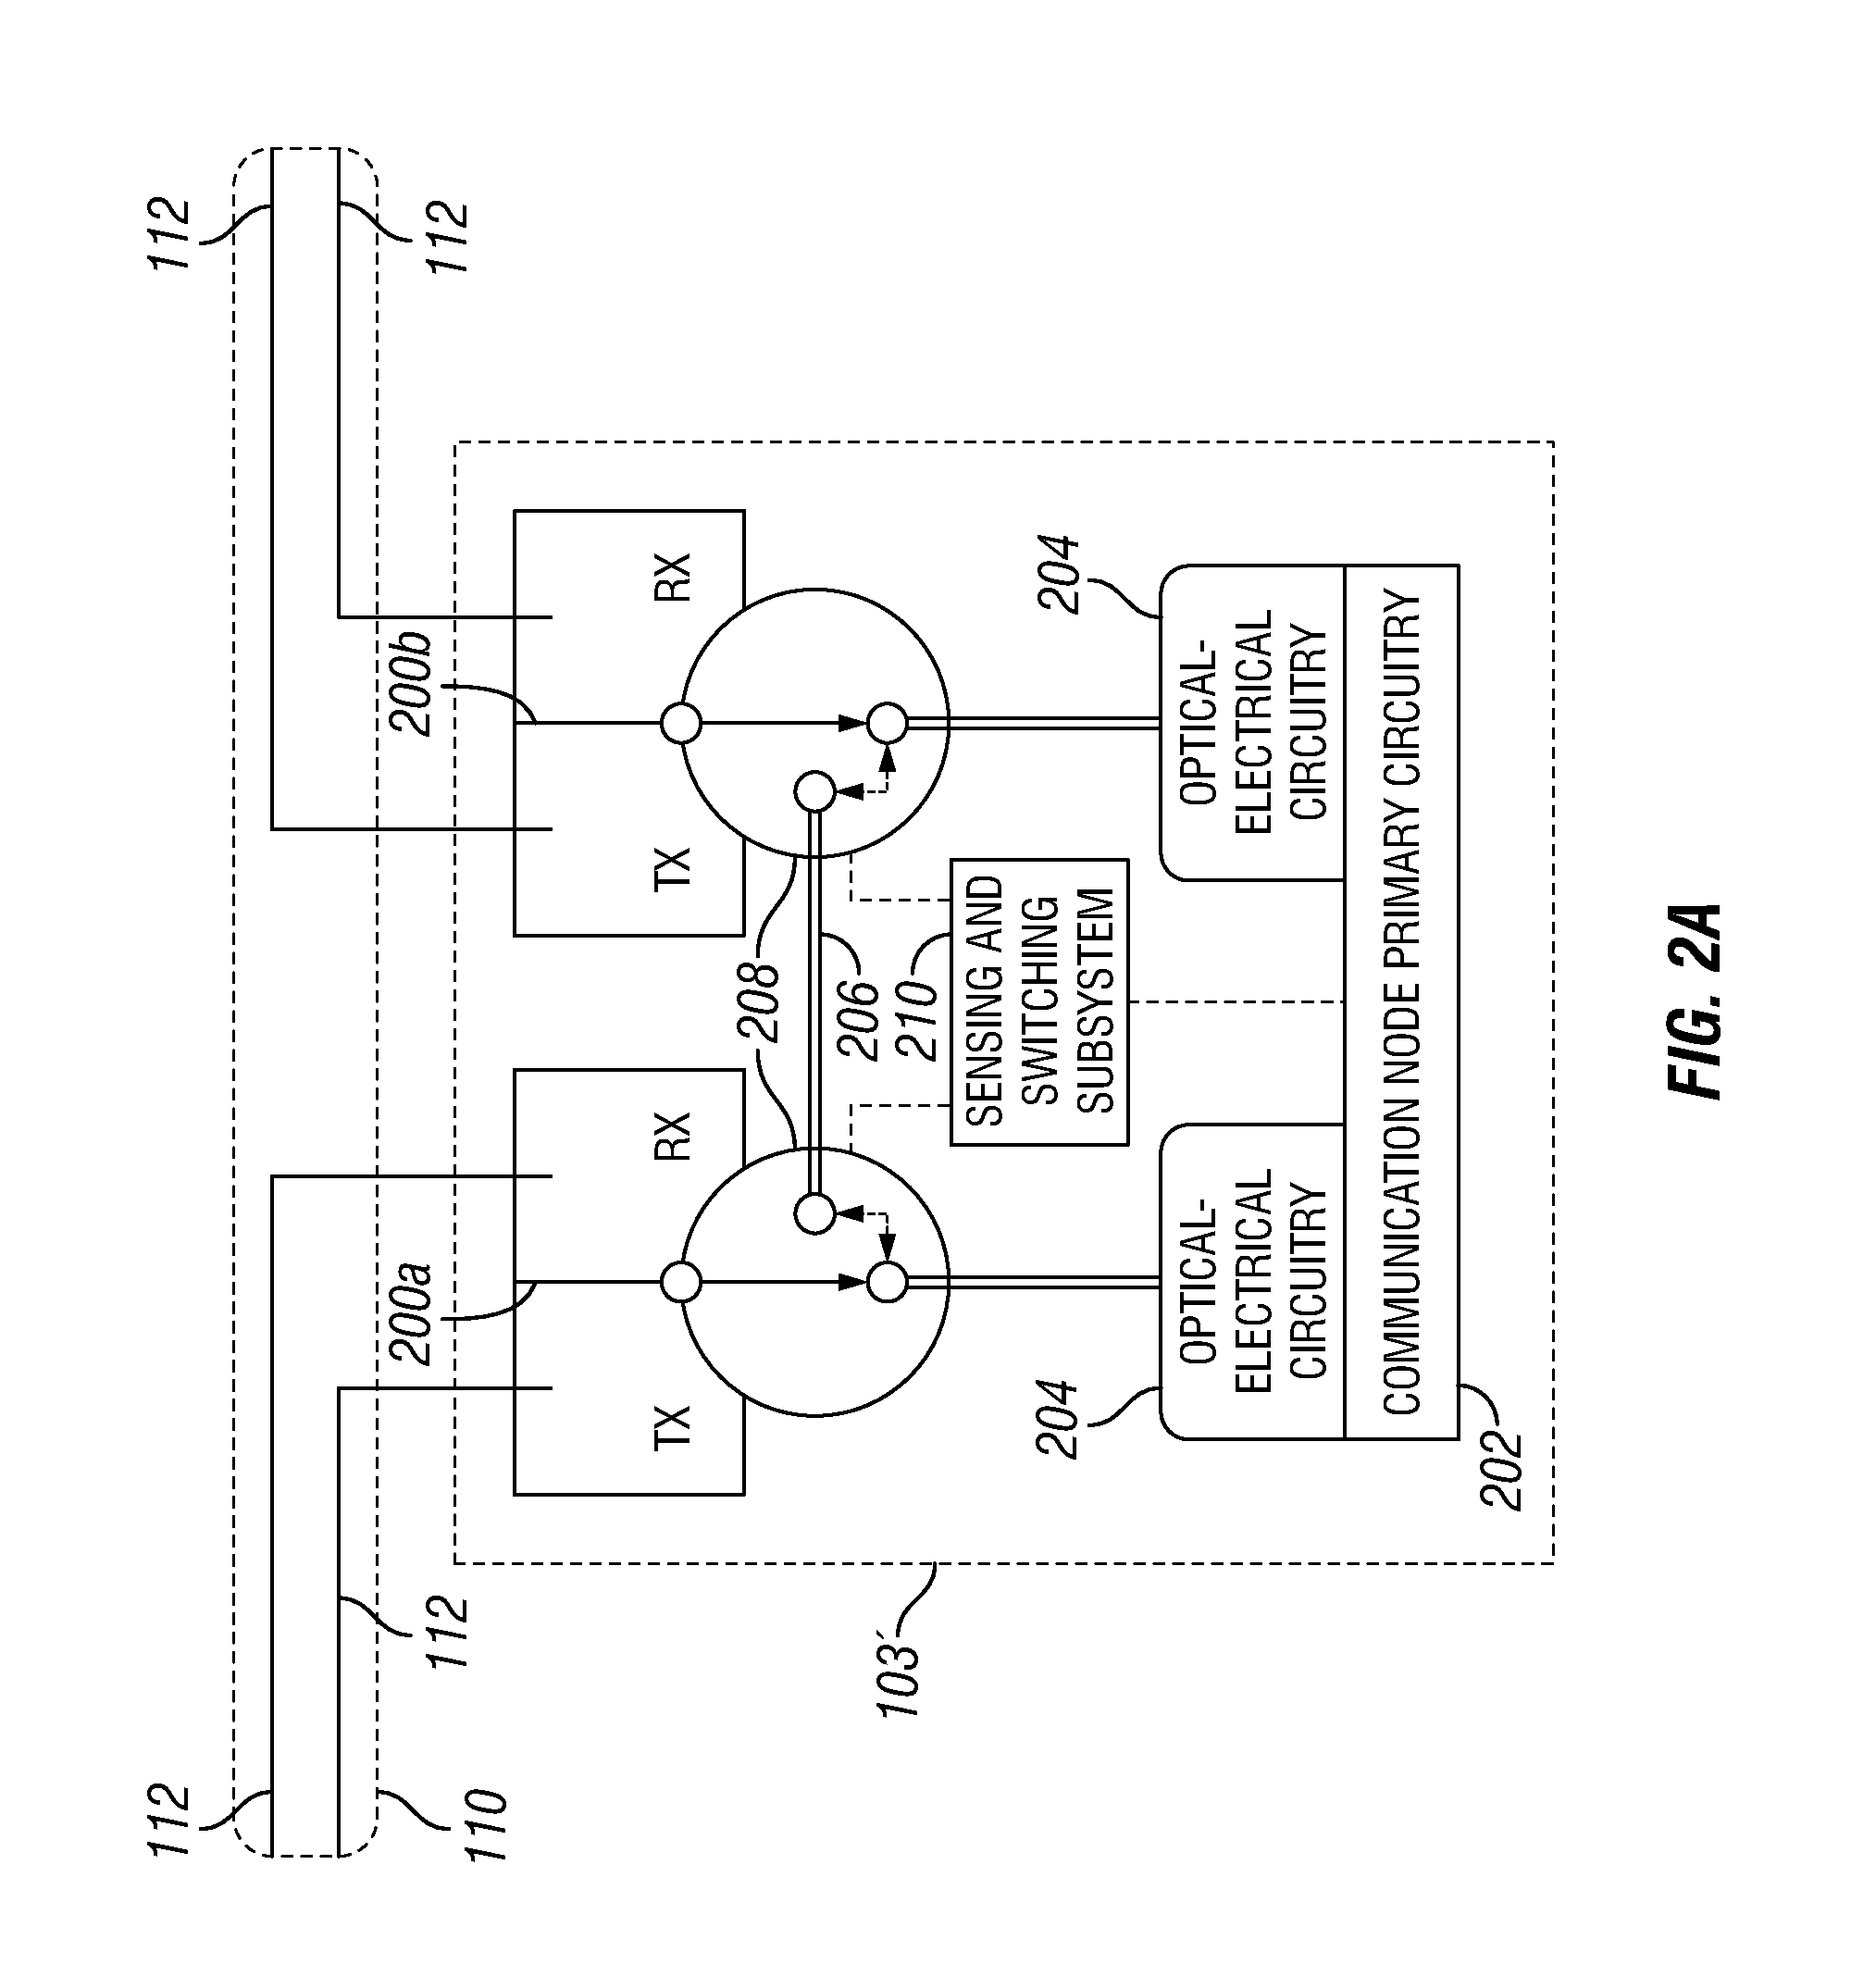 System, method, and apparatus for daisy chain network protection from node malfunction or power outage